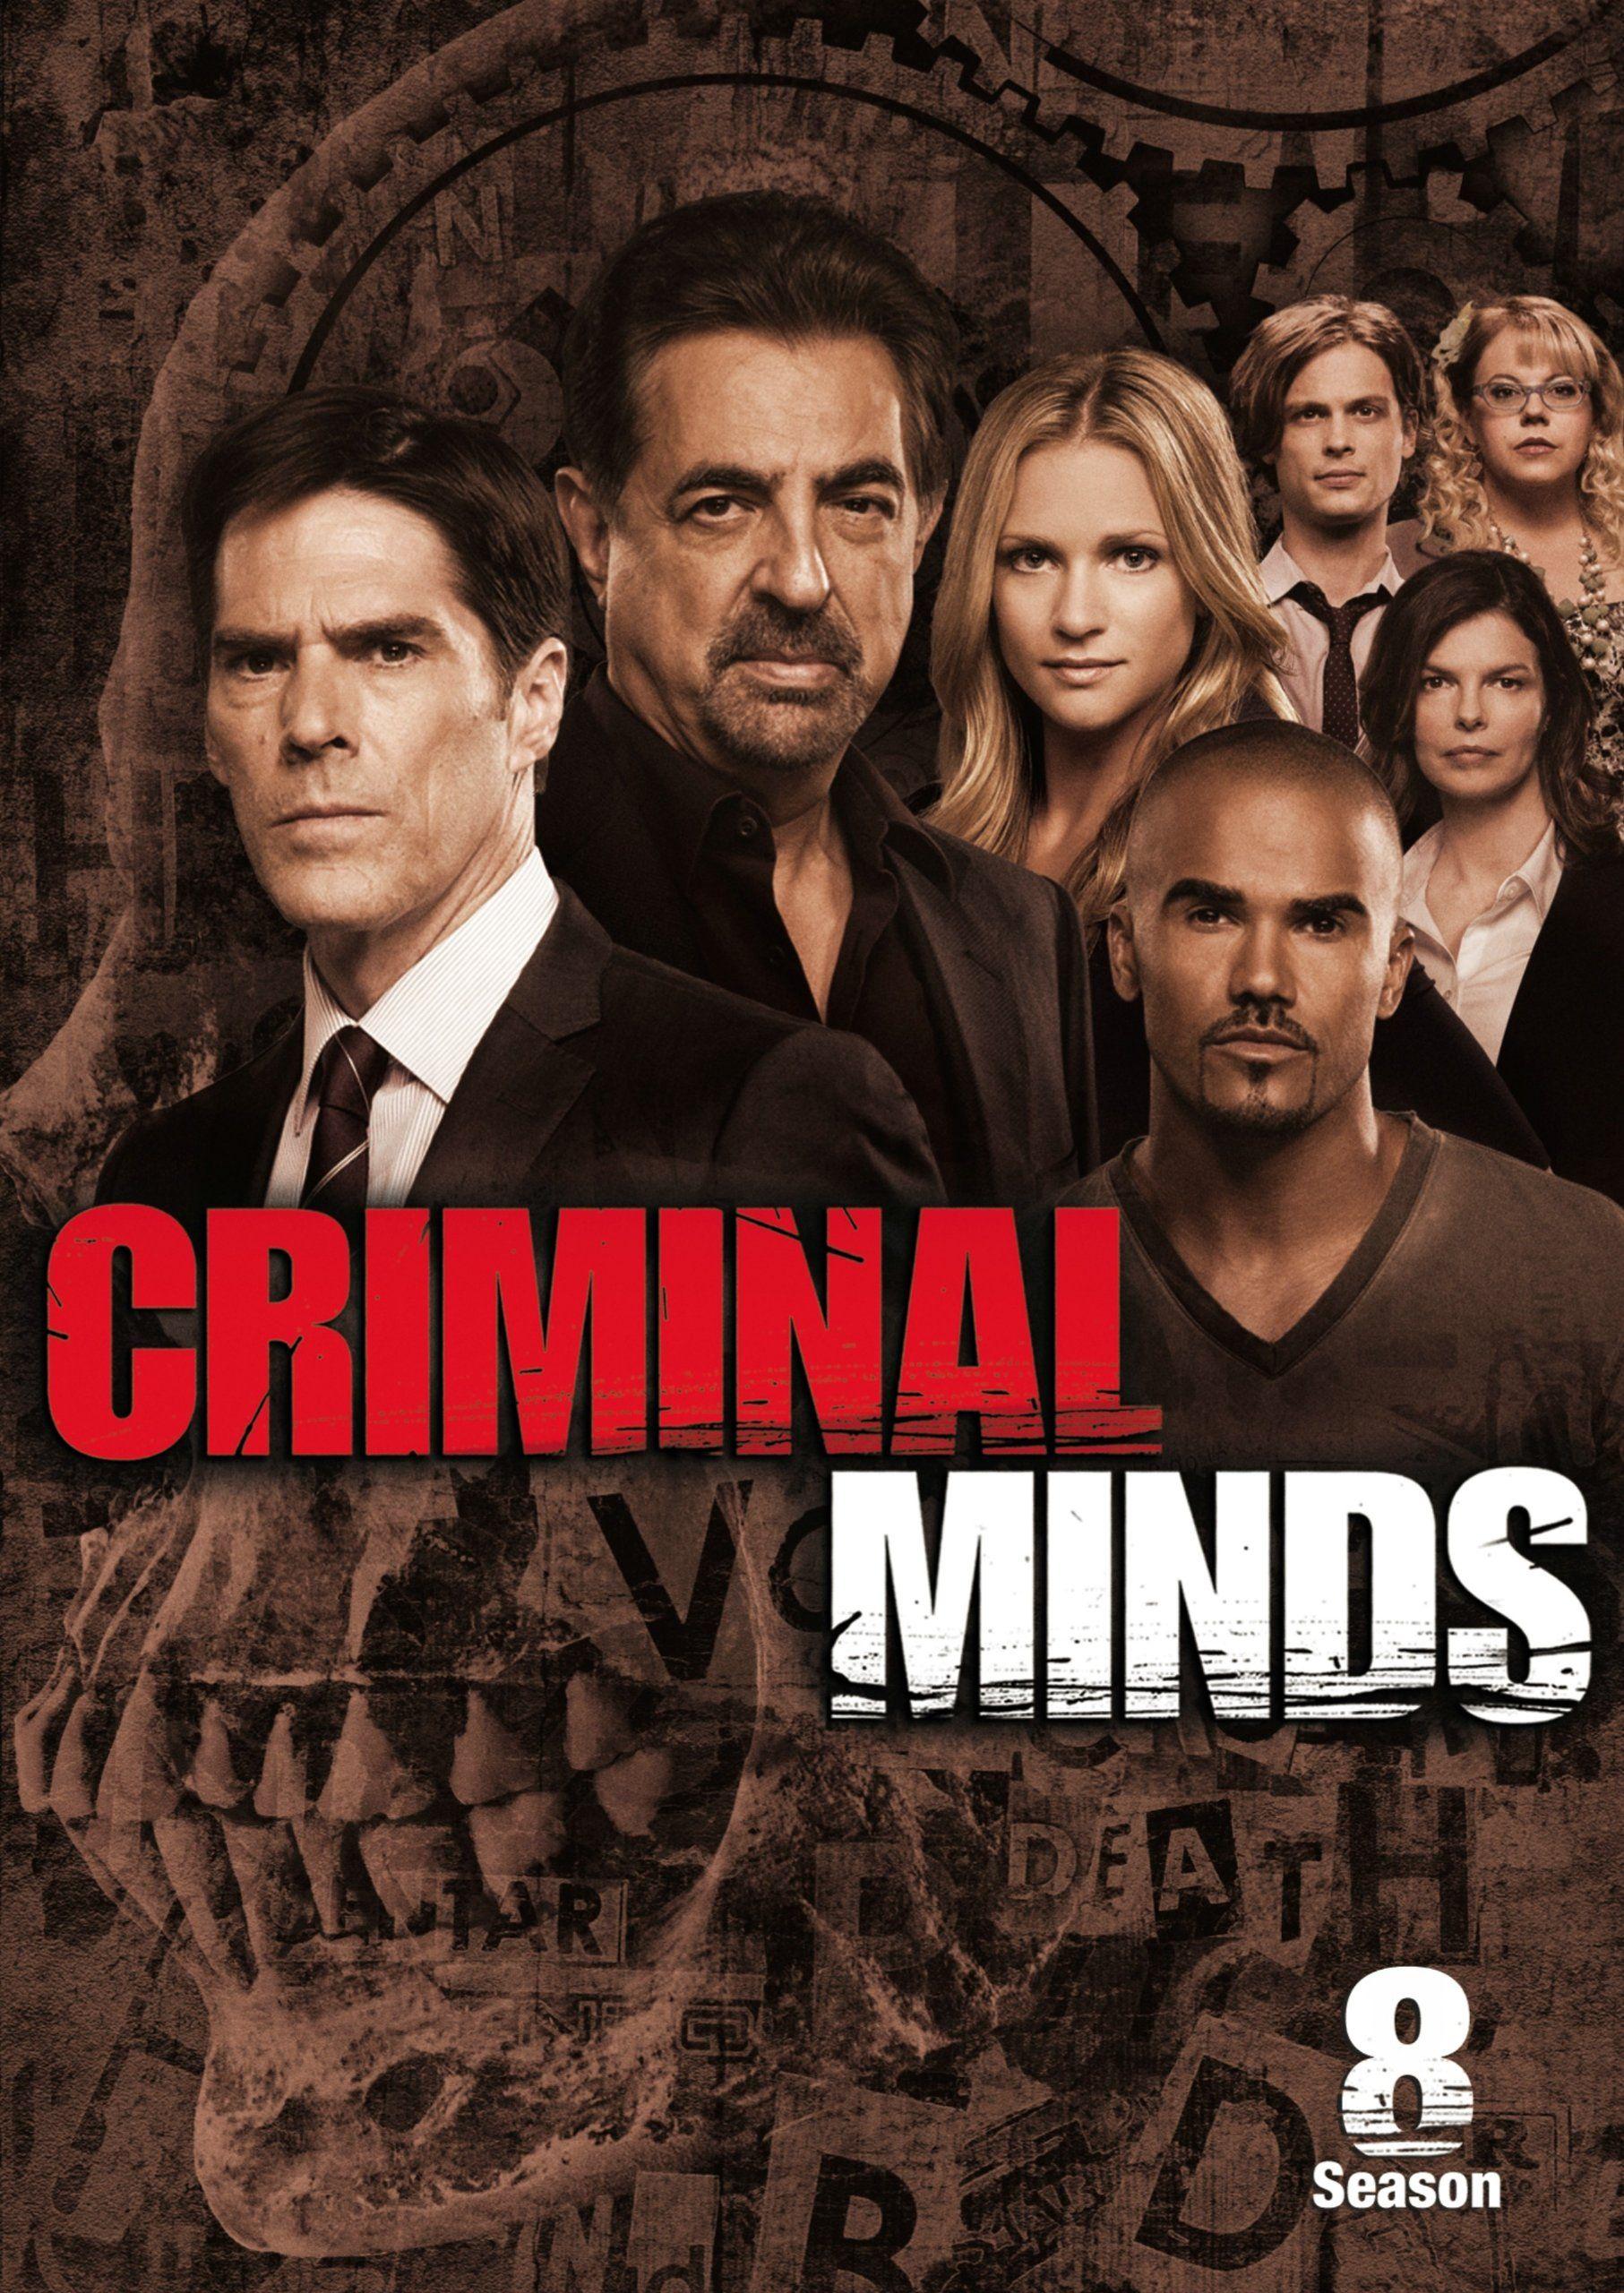 Free download image Criminal Minds Season 9 PC Android iPhone